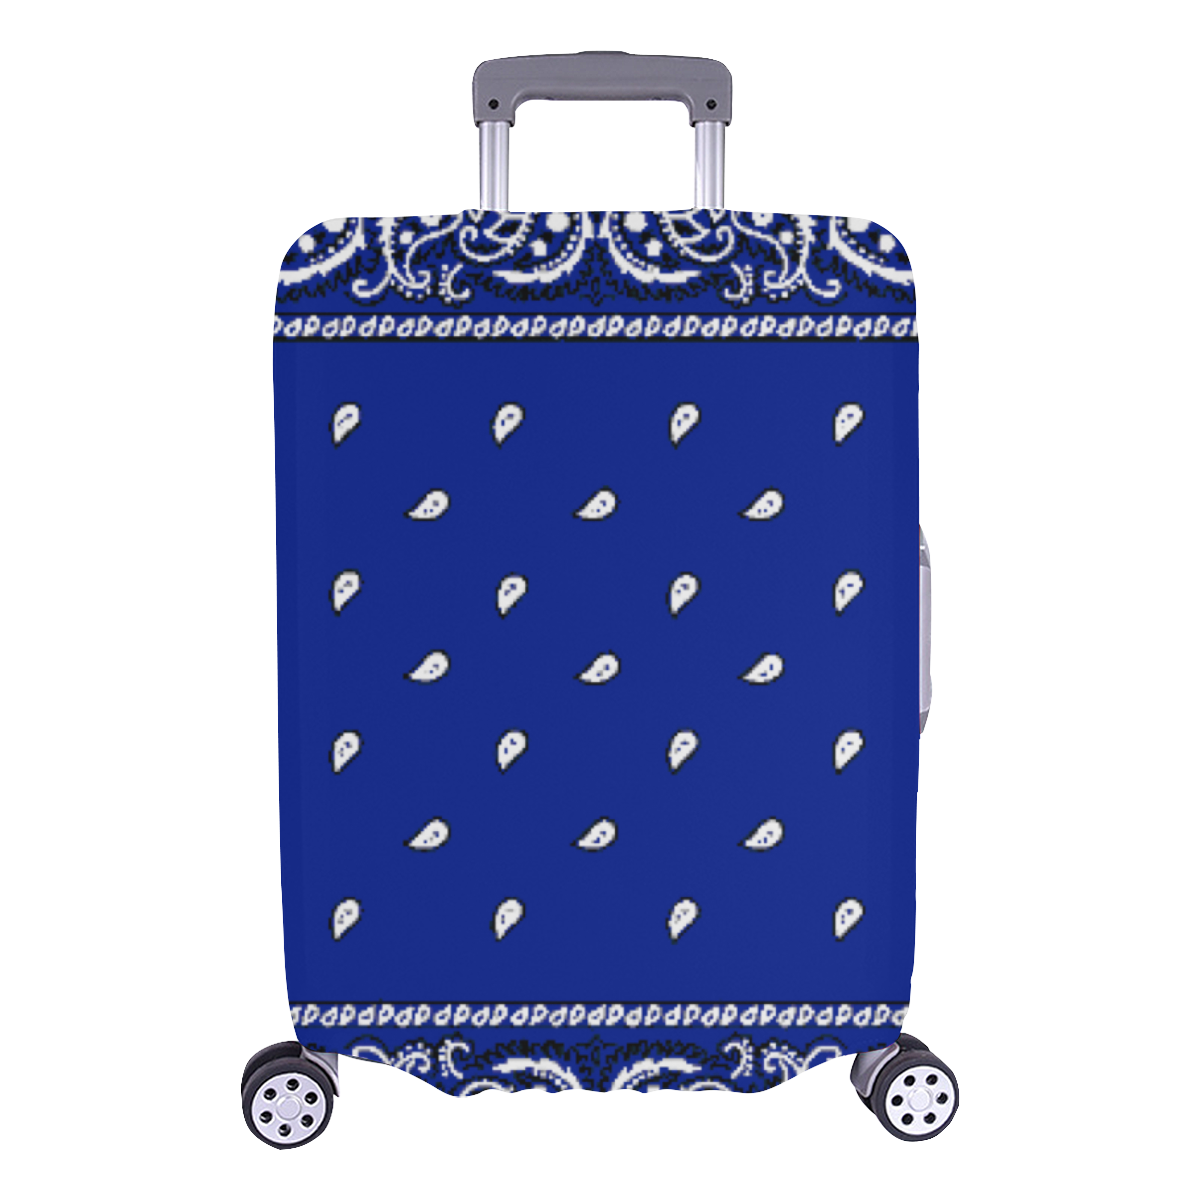 KERCHIEF PATTERN BLUE Luggage Cover/Large 26"-28"